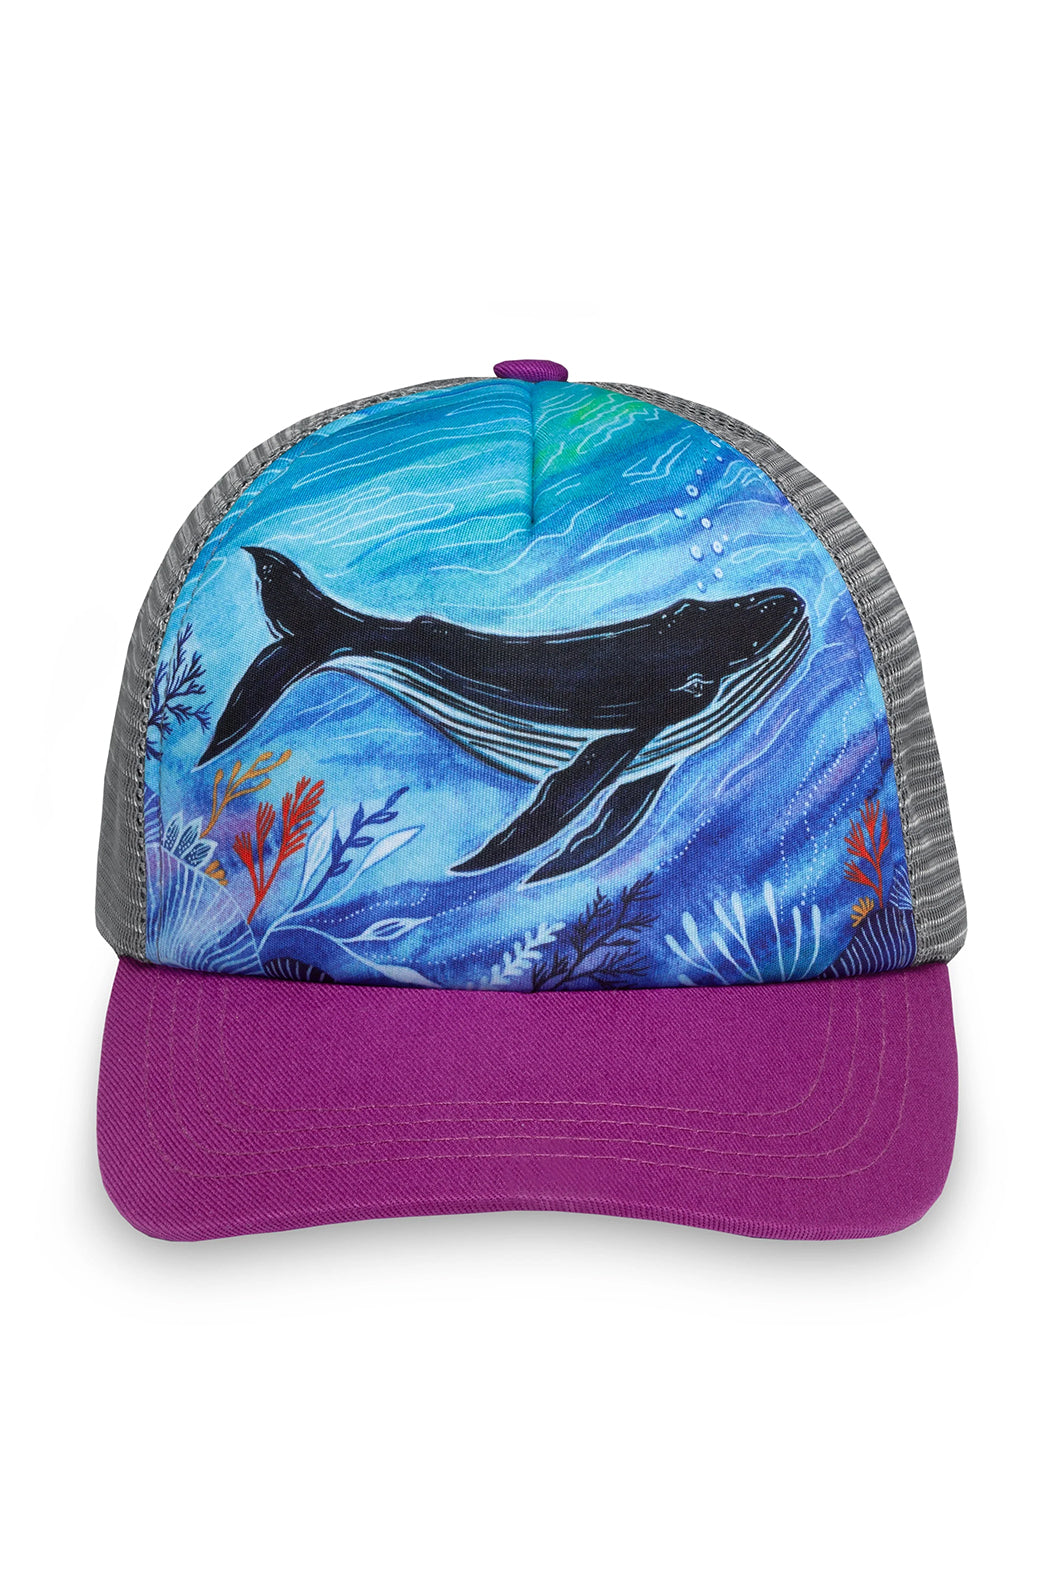 Sunday Afternoons Whale Song Trucker Hat